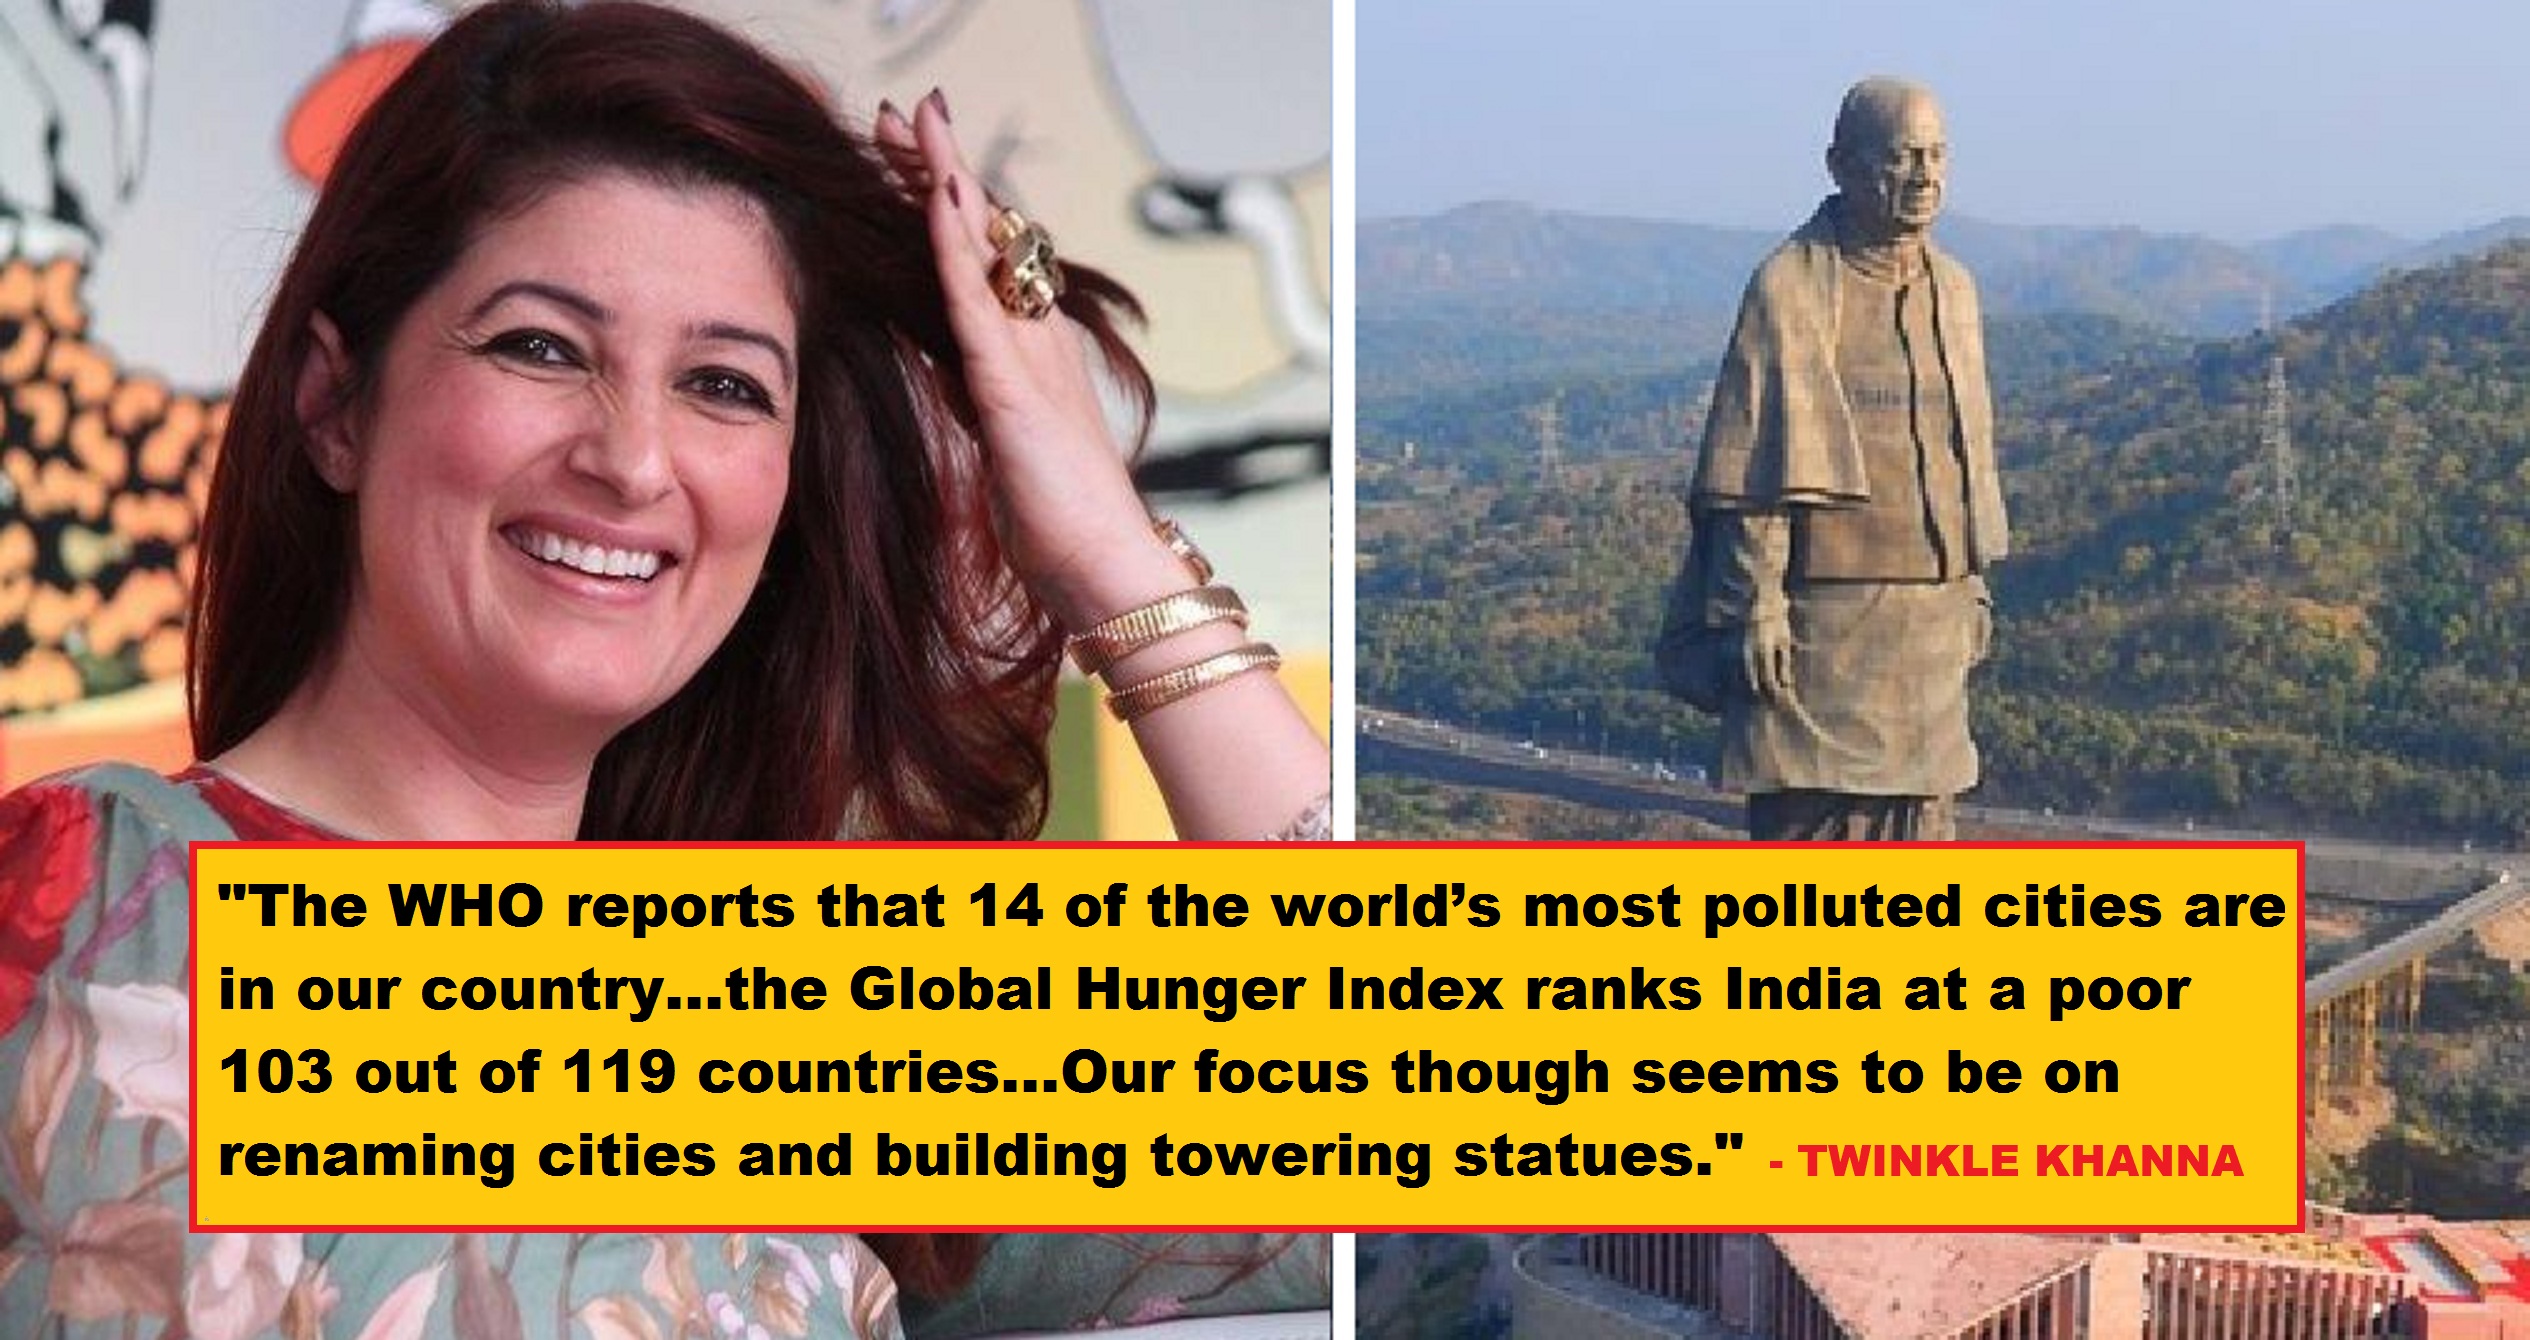 Twinkle Khanna Takes a Dig At Gov Building Tall Statues And Renaming Cities In Her Blog